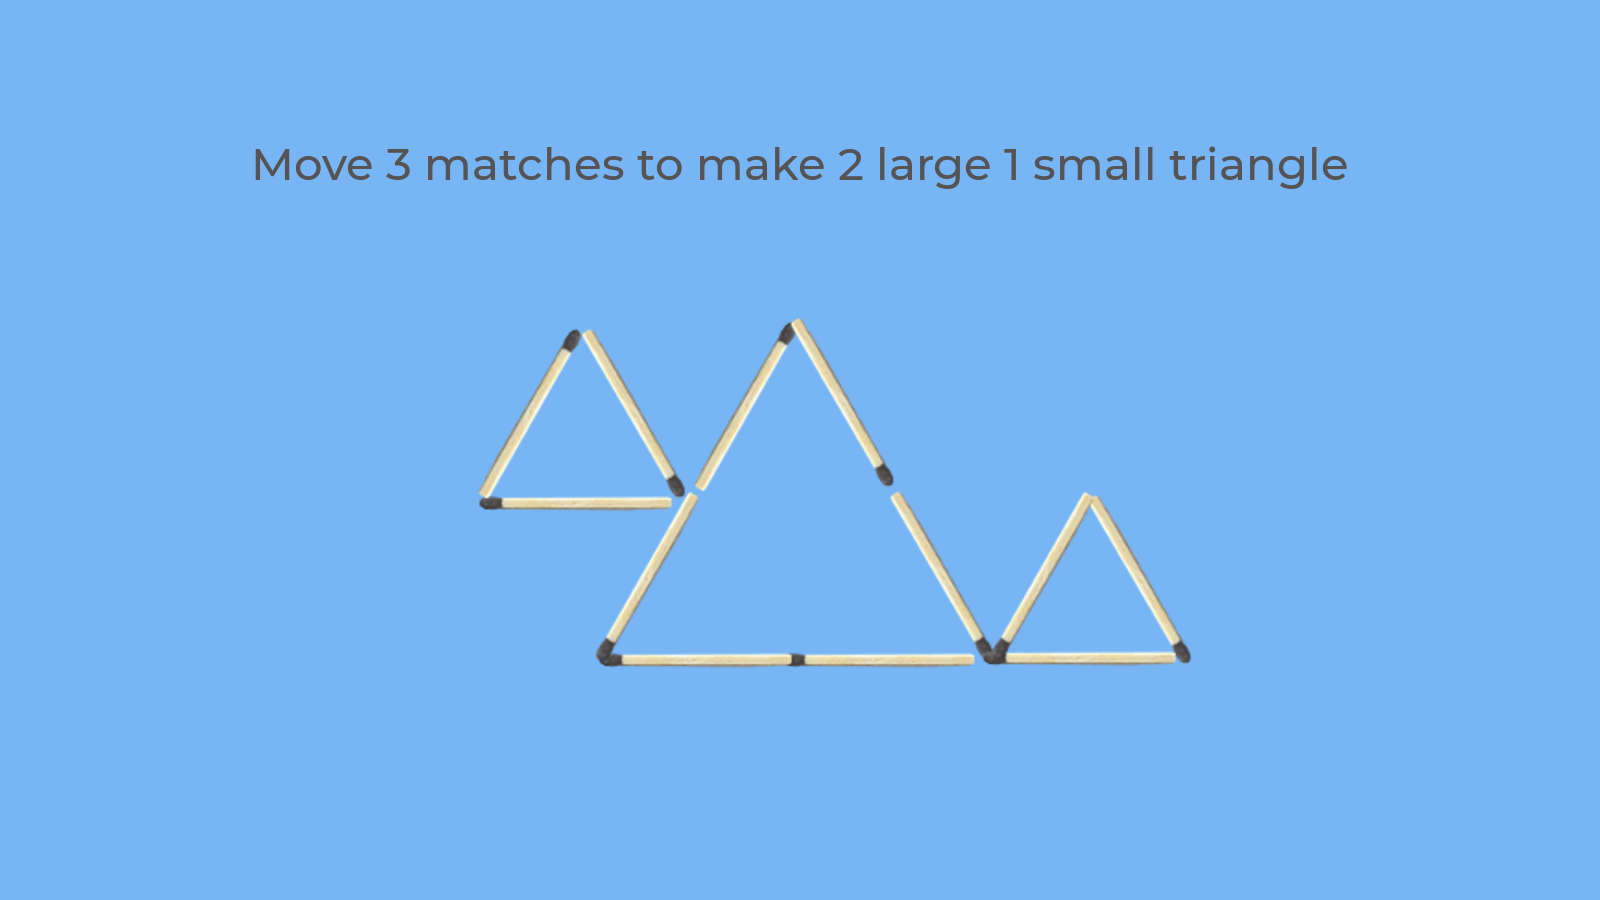 Move 3 matches to form 2 large and 1 small triangle puzzle